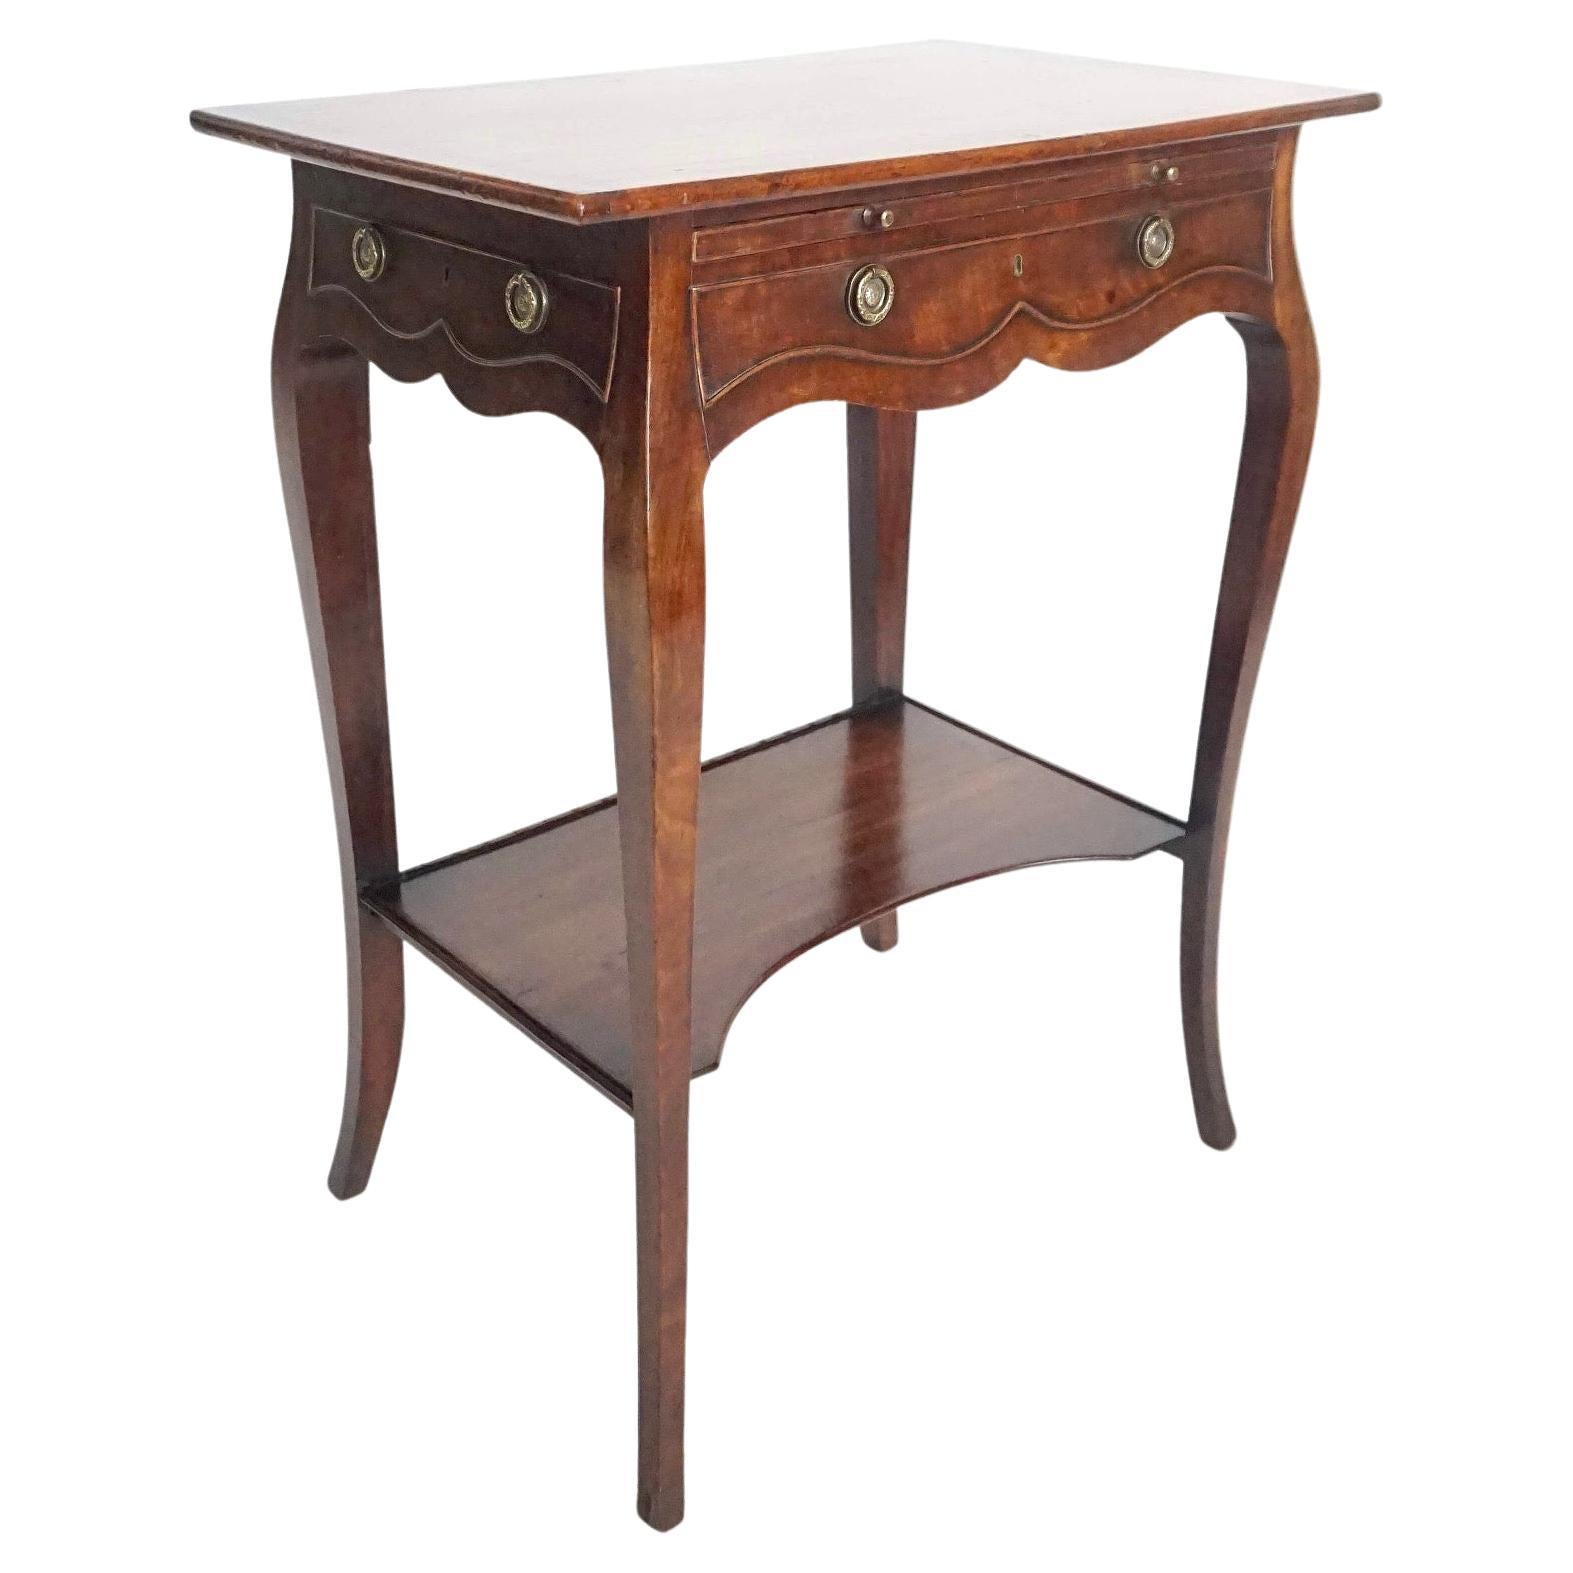 English George III Sabicu & Gonçalo Alves Work Table in the Manner of John Cobb